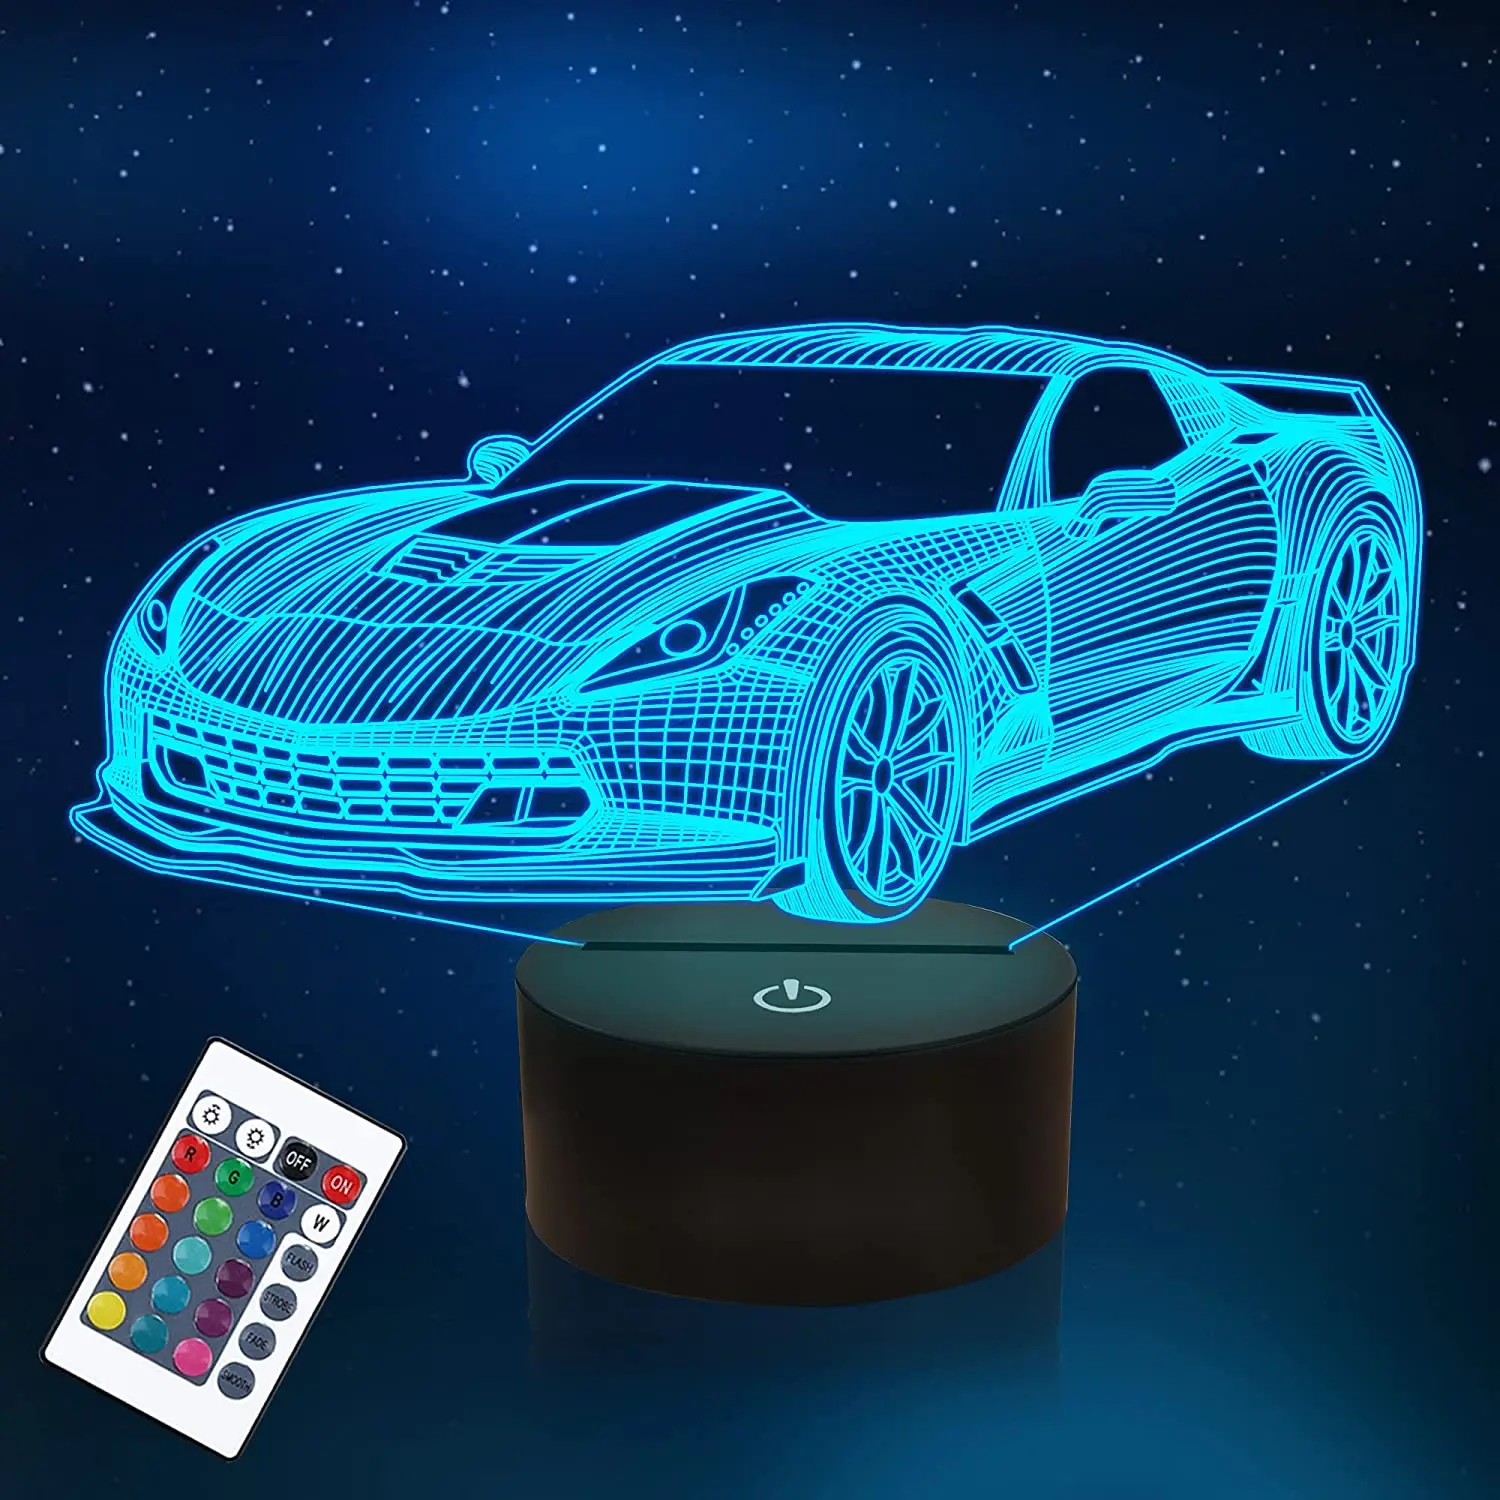 

Car Night Light 3D LED Illusion Lamp 16 Colors USB and Battery Operated Touch Control with Remote Creative Gifts for Kids